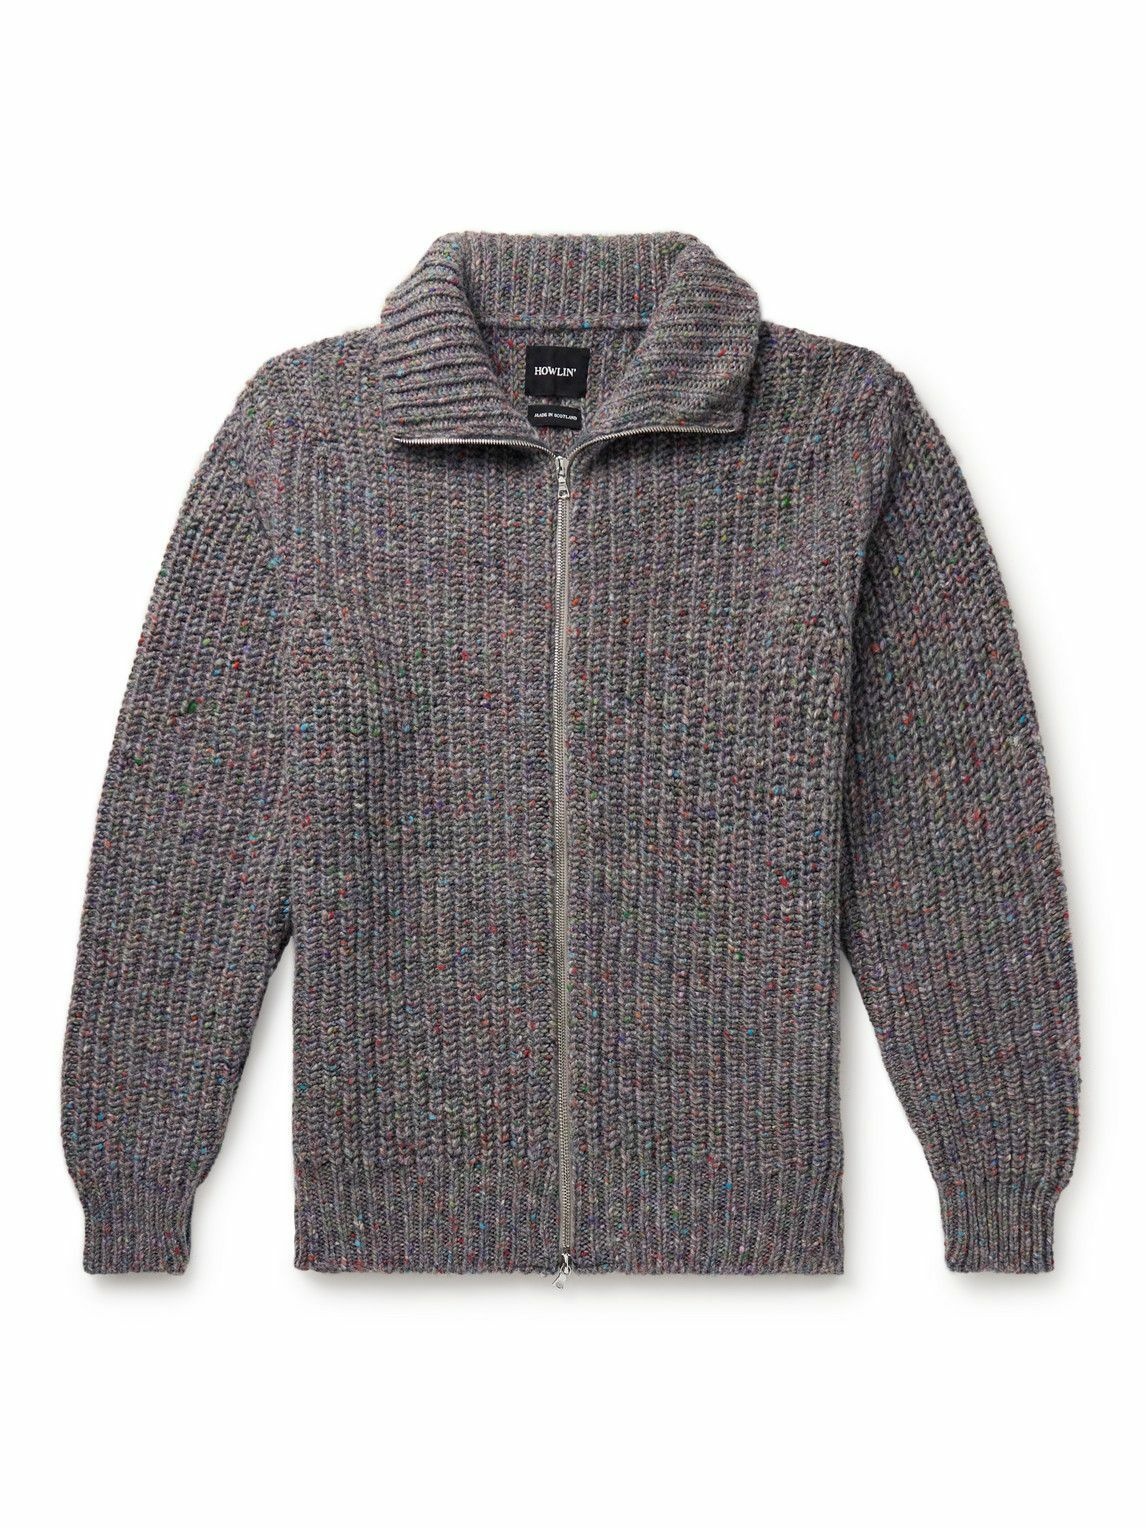 Photo: Howlin' - Loose Ends Ribbed Donegal Wool Zip-Up Cardigan - Gray